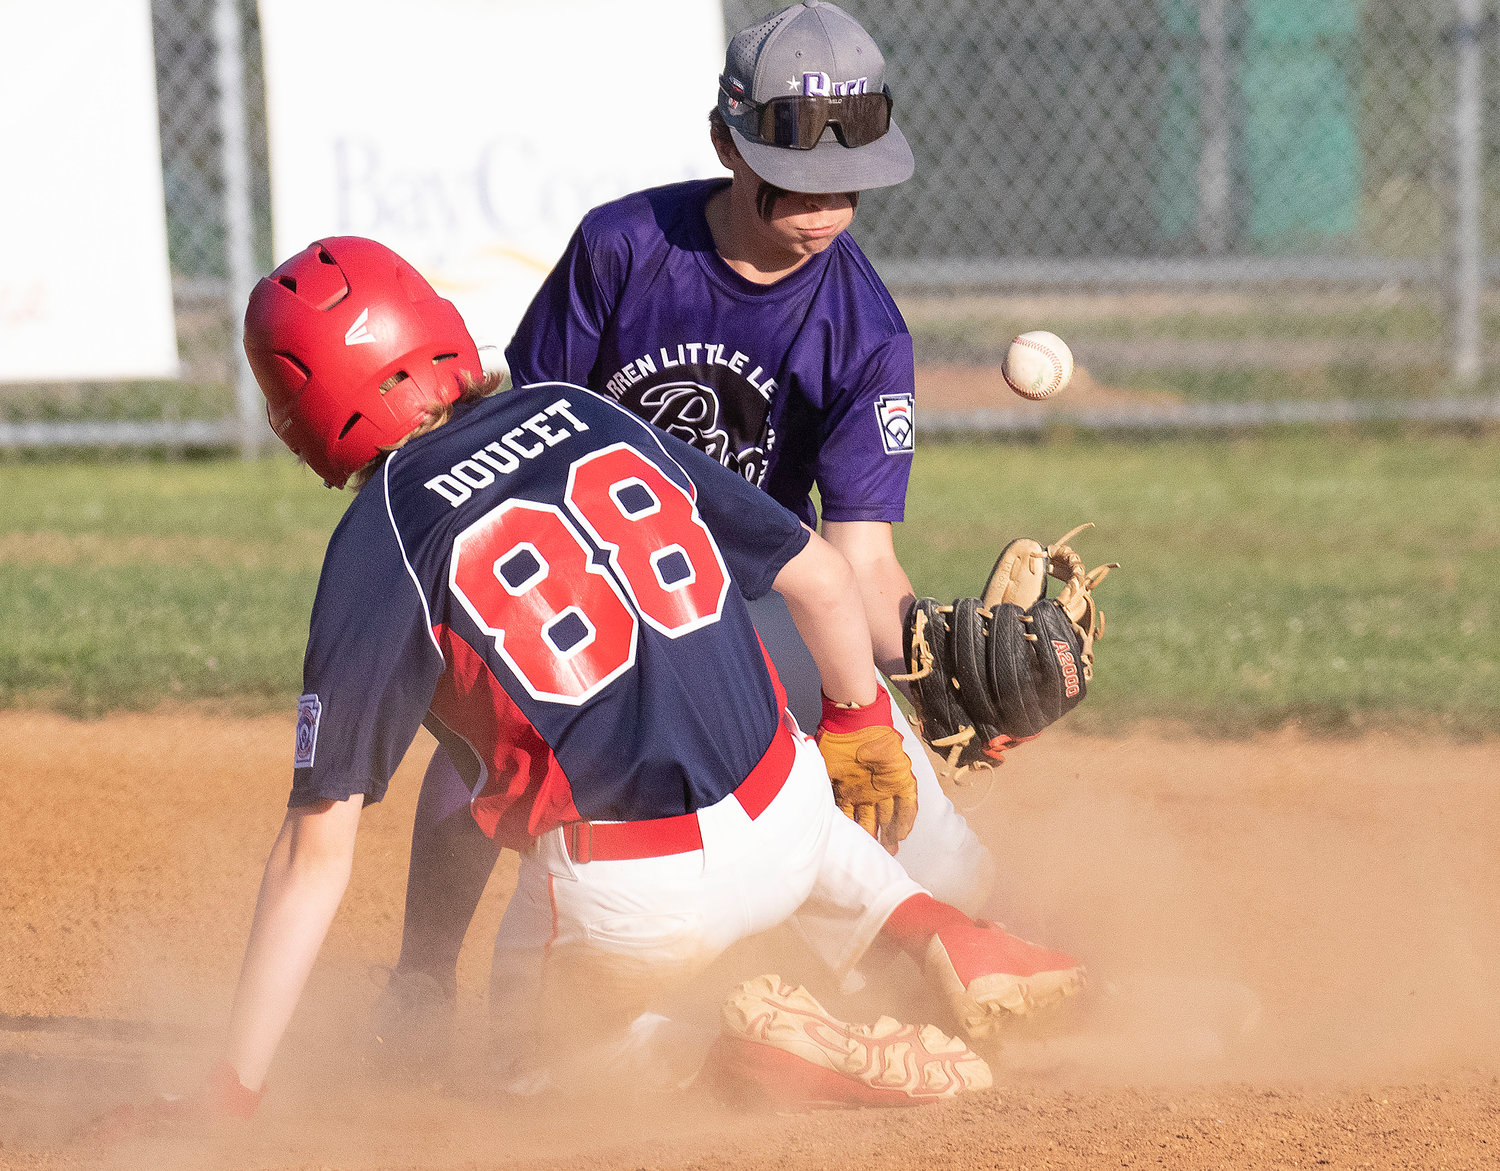 Shortstop Parker DeWolf bobbles a throw from the outfield as Tyler Doucet slides safely into second bases.